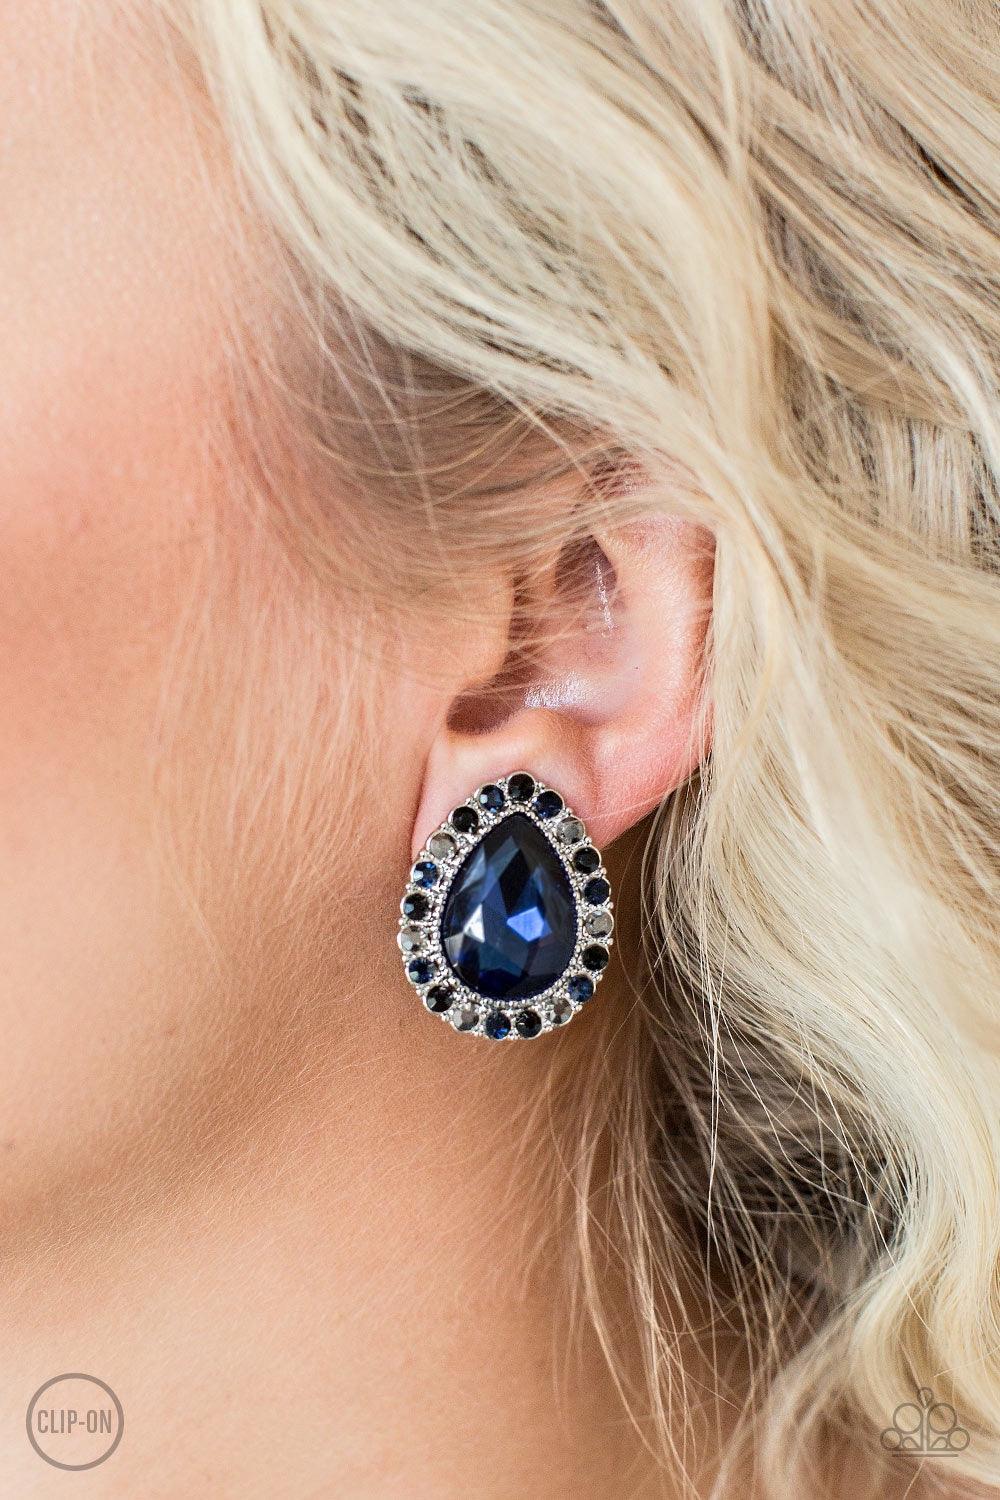 Paparazzi Accessories All HAUTE and Bothered - Multi *Clip-On Glassy black, blue, and hematite rhinestones spin around a faceted blue teardrop gem for a regal look. Earring attaches to a standard clip-on fitting Jewelry